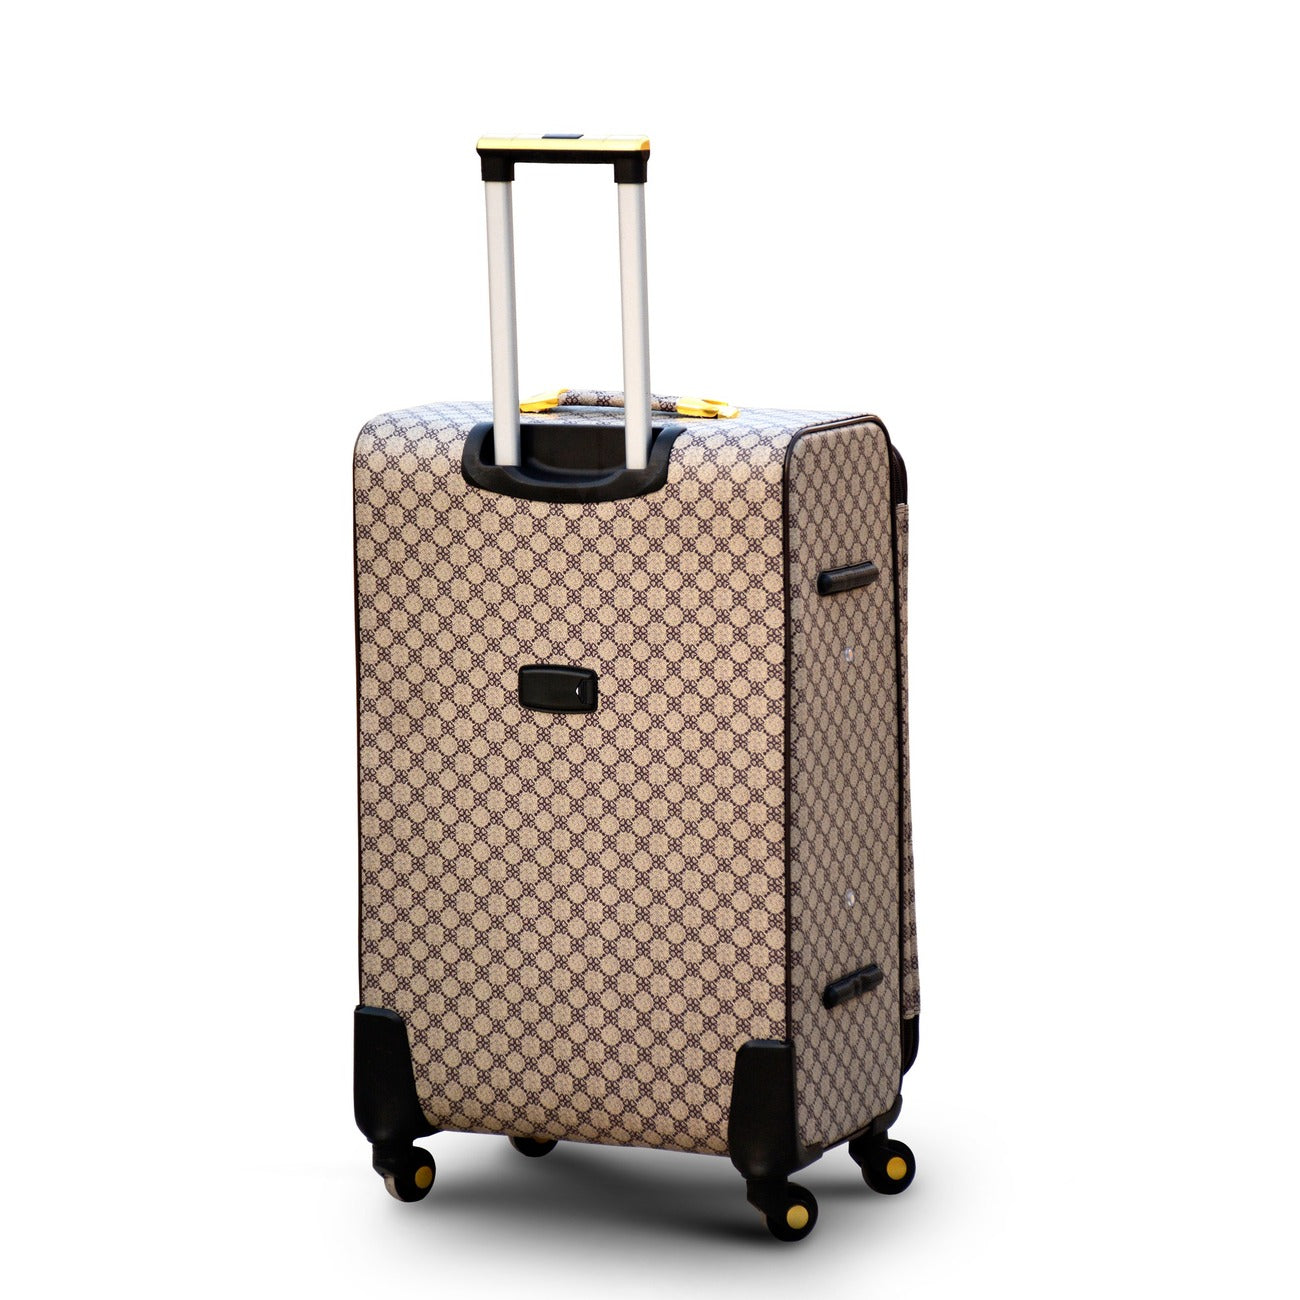 32" VL PU Leather Soft Material Spinner Wheel Luggage with Beauty Case Combo Set zaappy.com